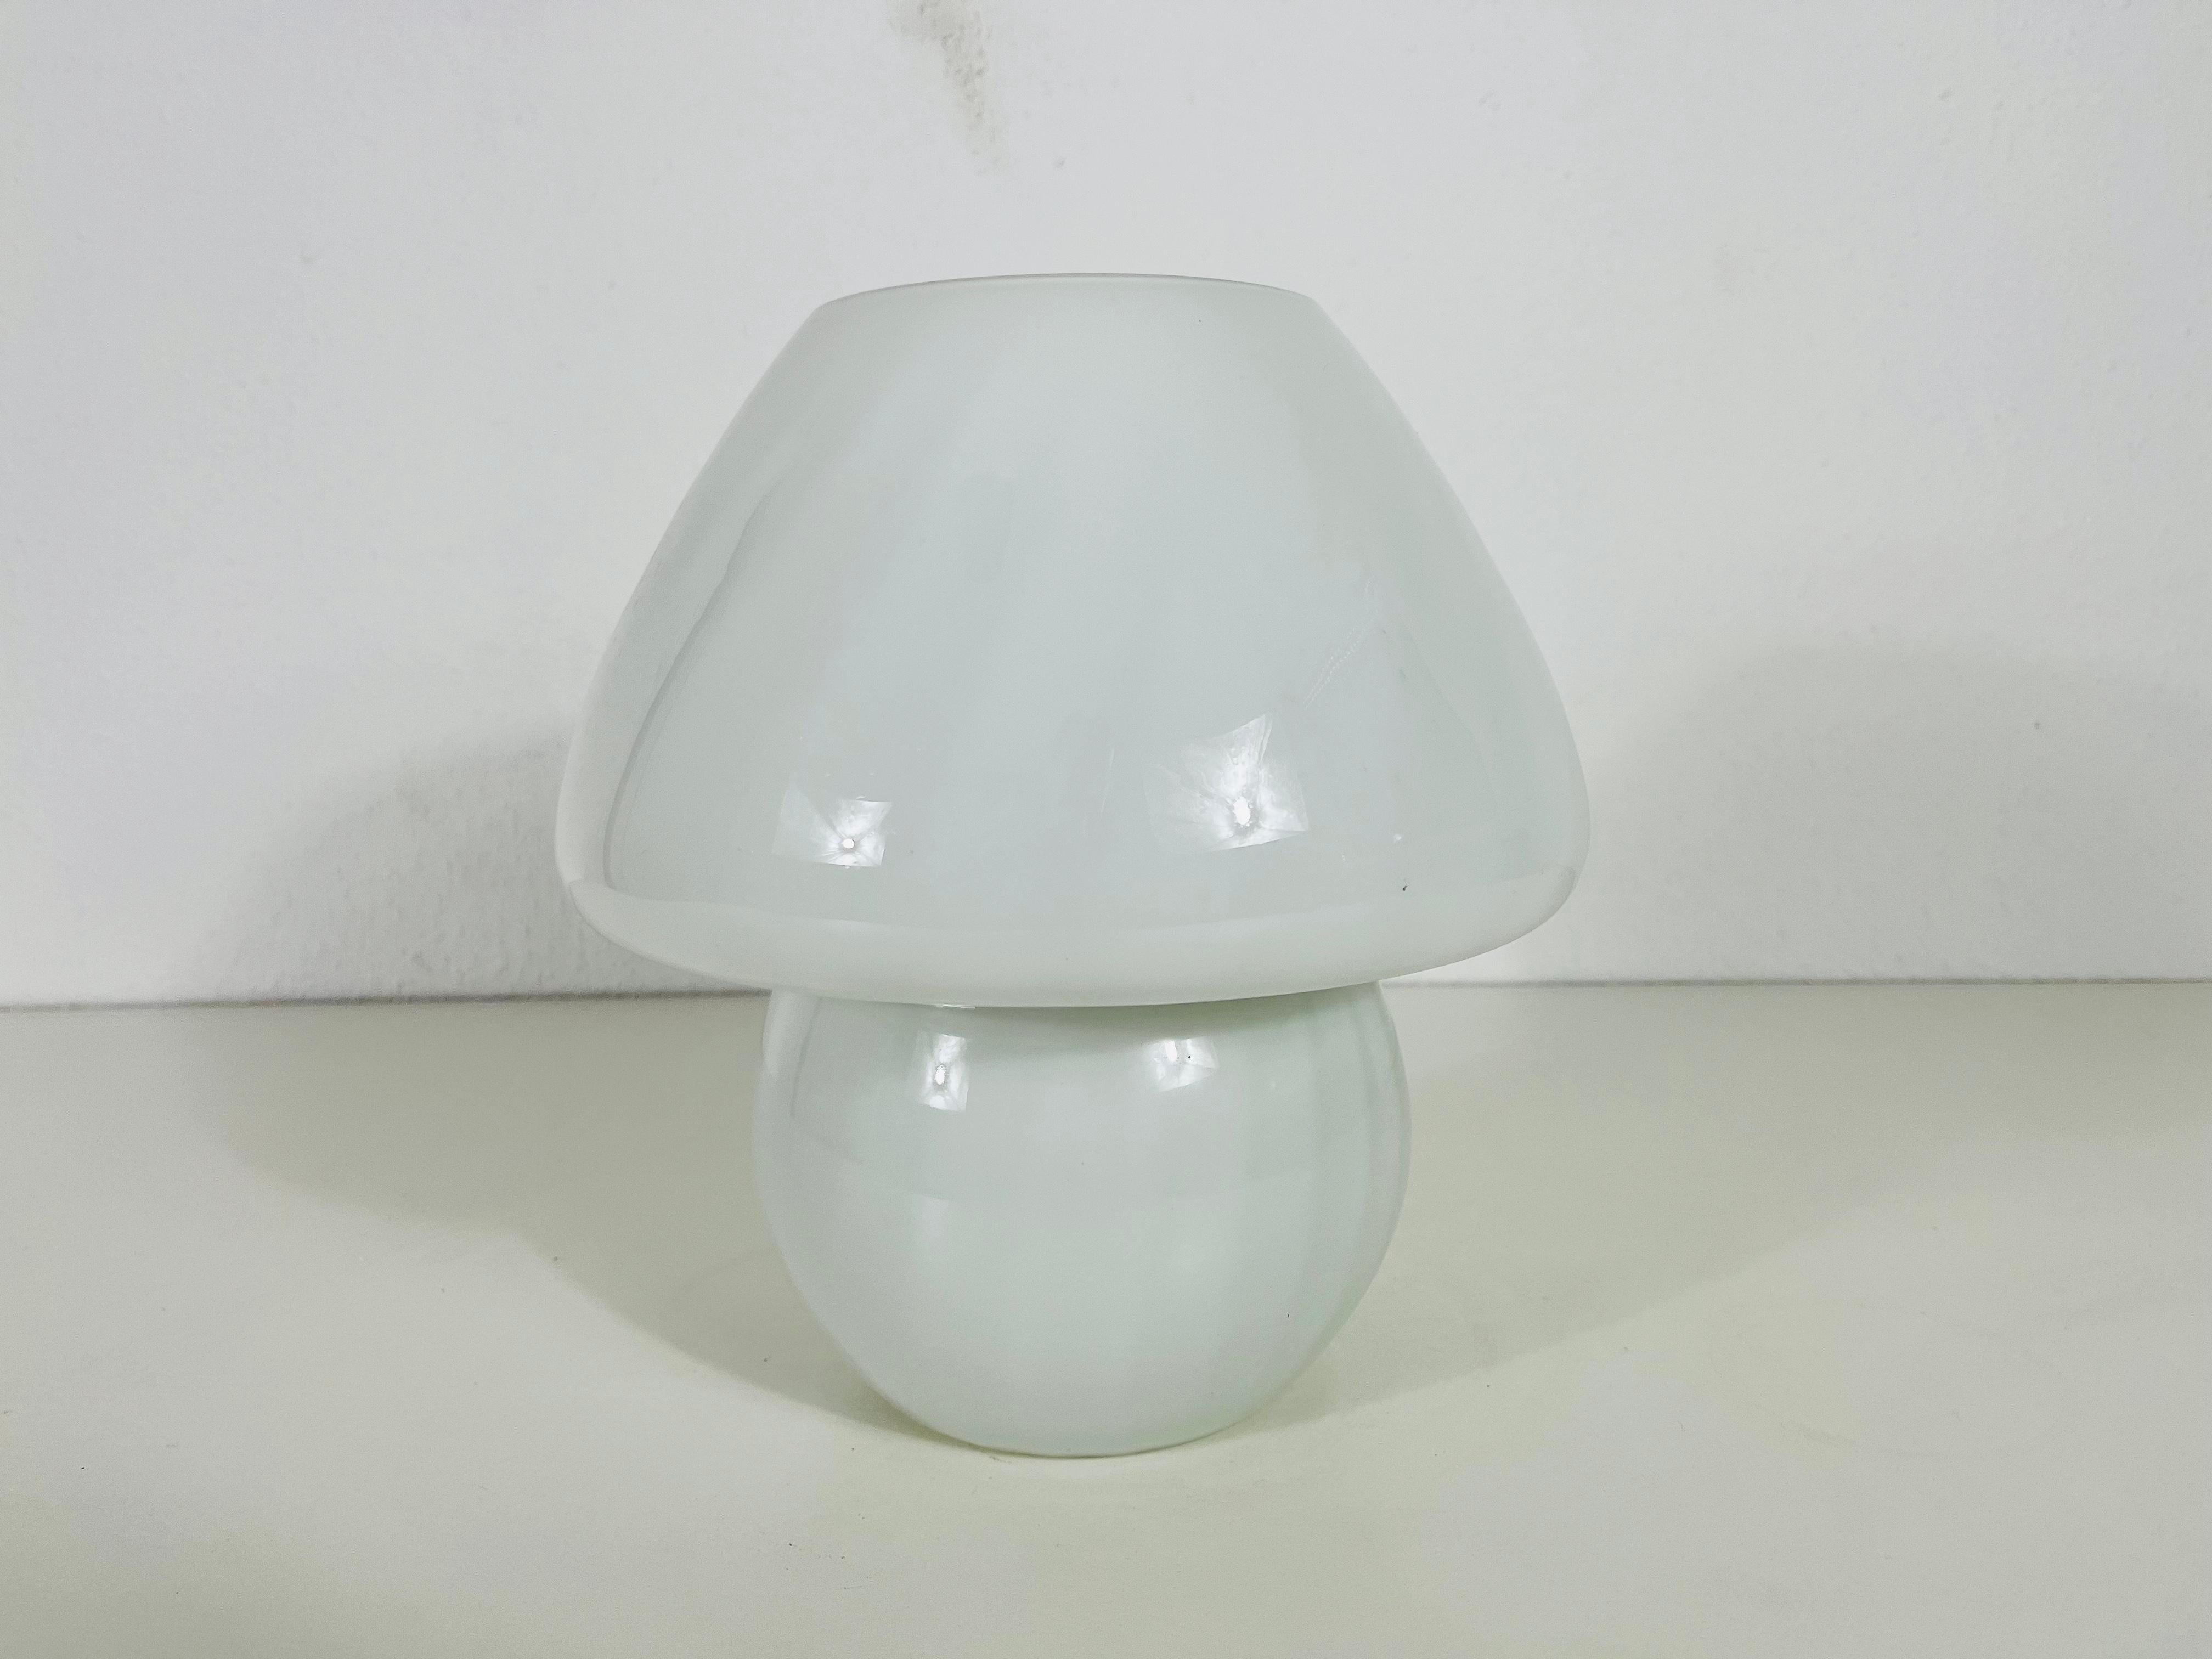 Beautiful Italian table lamp by Vetri d‘Arte Murano. It has an extraordinary mushroom shape. Very good vintage condition.

The lights requires one E27 light bulb. Works with both 220/120 V. Very good vintage condition.

Free worldwide shipping.